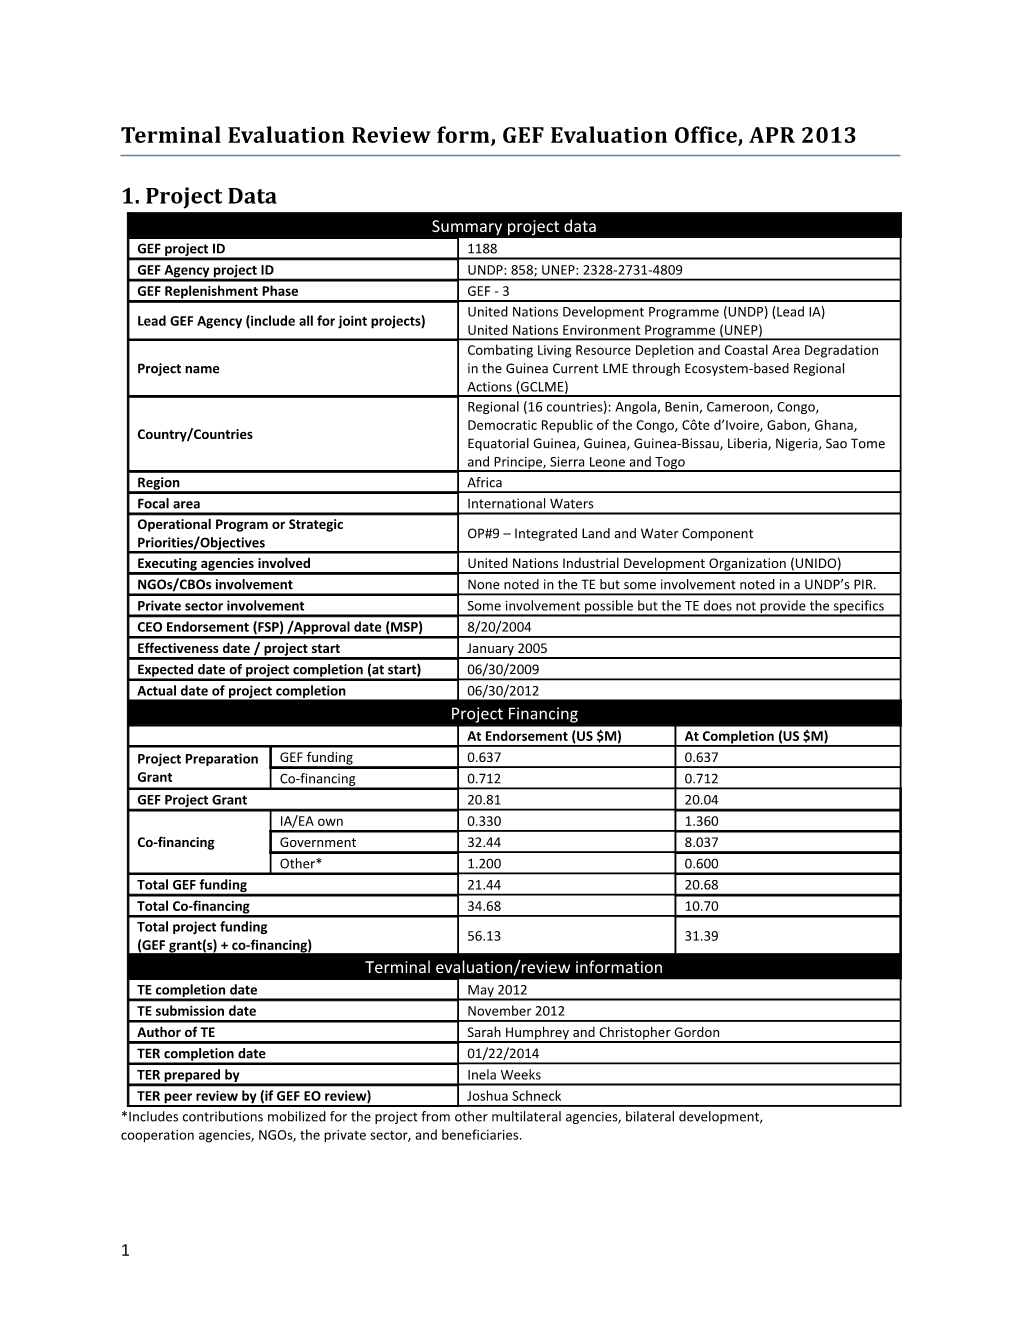 Terminal Evaluation Review Form, GEF Evaluation Office, APR 2013